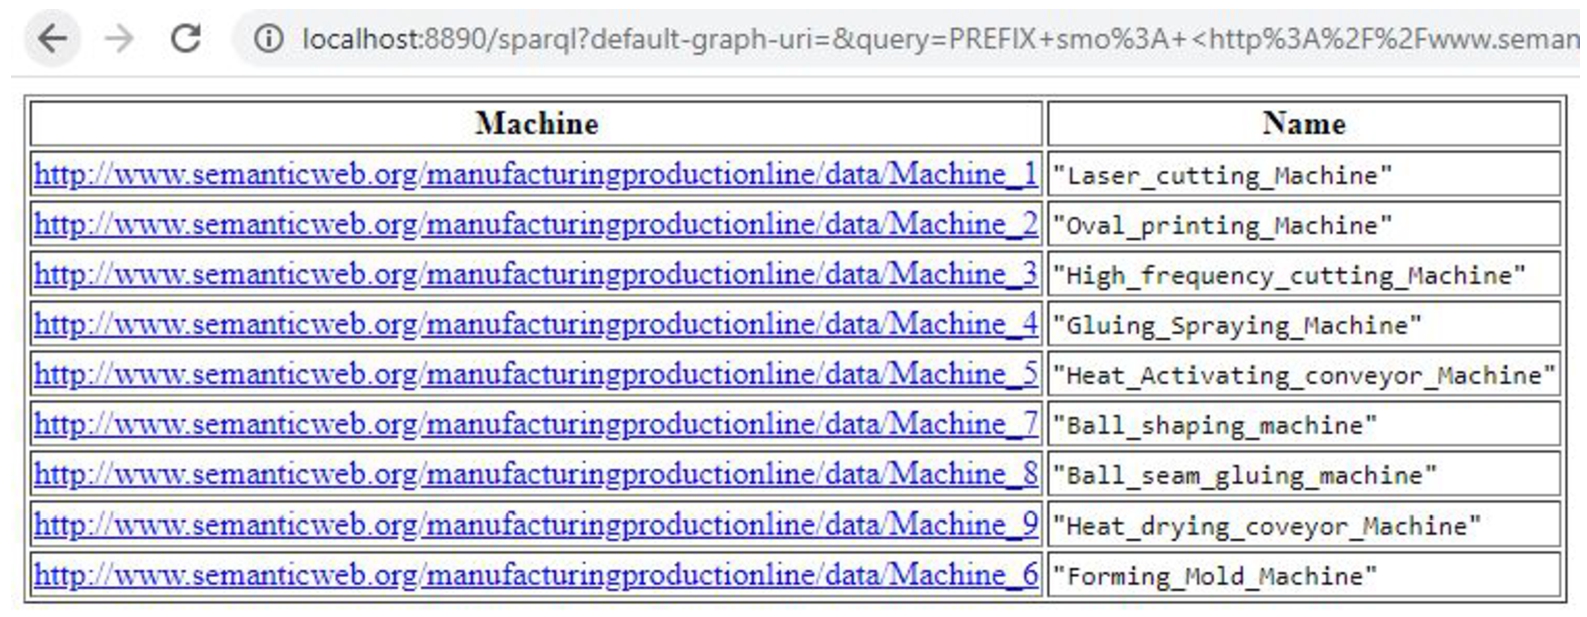 Listing 1 query provides the number of machines involved in the production line with their names.